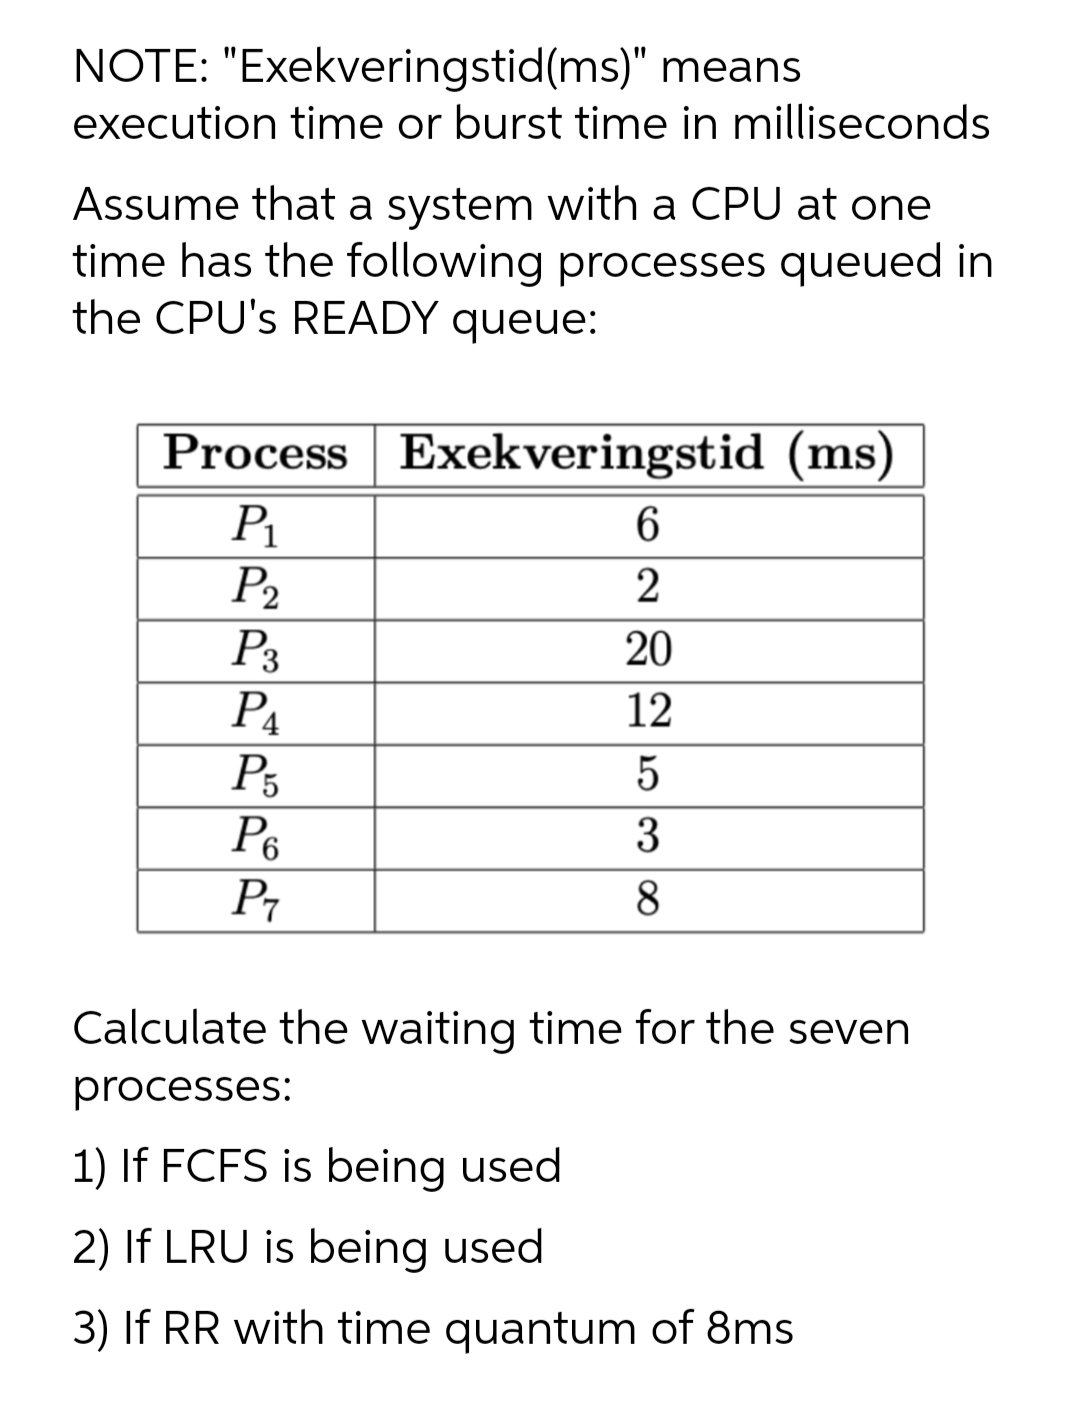 NOTE: "Exekveringstid(ms)" means
execution time or burst time in milliseconds
Assume that a system with a CPU at one
time has the following processes queued in
the CPU's READY queue:
Process Exekveringstid (ms)
6.
P1
P2
P3
P4
P5
P6
P7
20
12
3
8
Calculate the waiting time for the seven
processes:
1) If FCFS is being used
2) If LRU is being used
3) If RR with time quantum of 8ms
